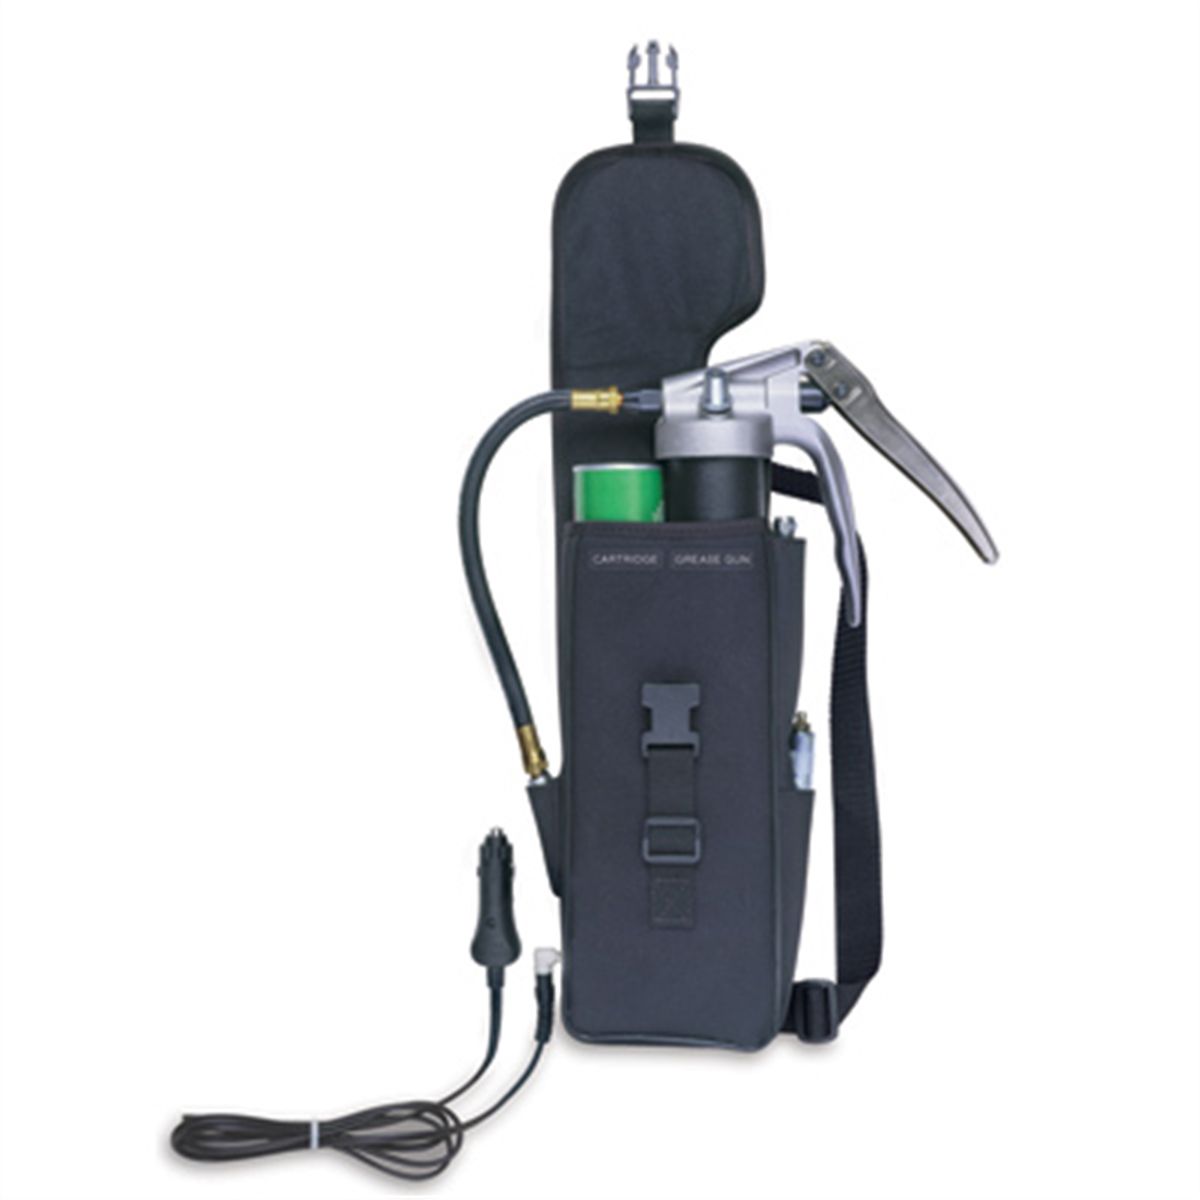 Portable Grease Heater